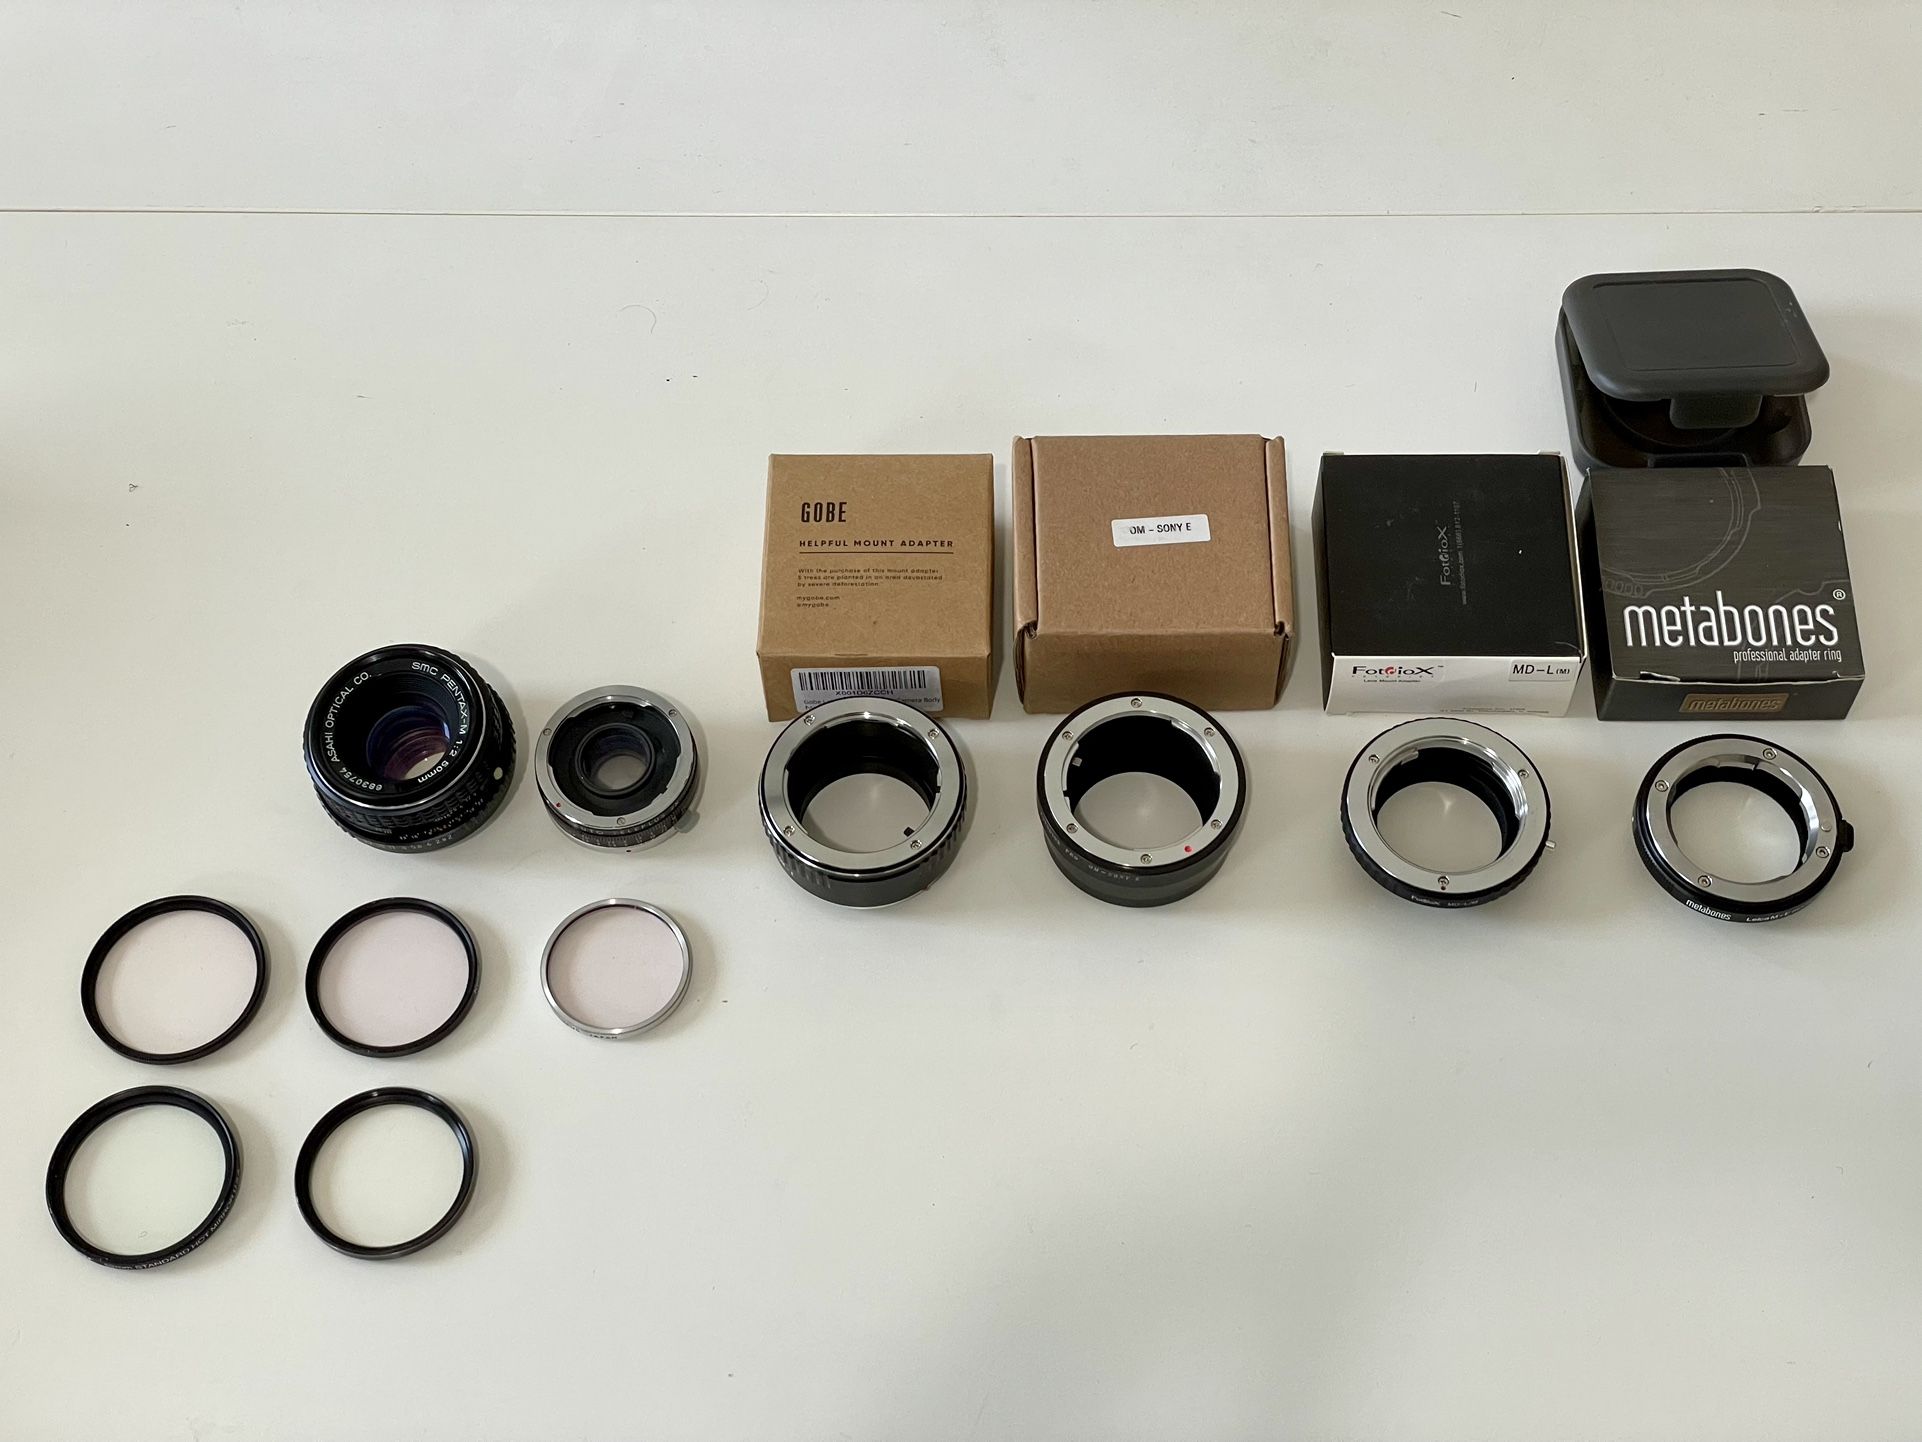 Lens Adapters And Filters